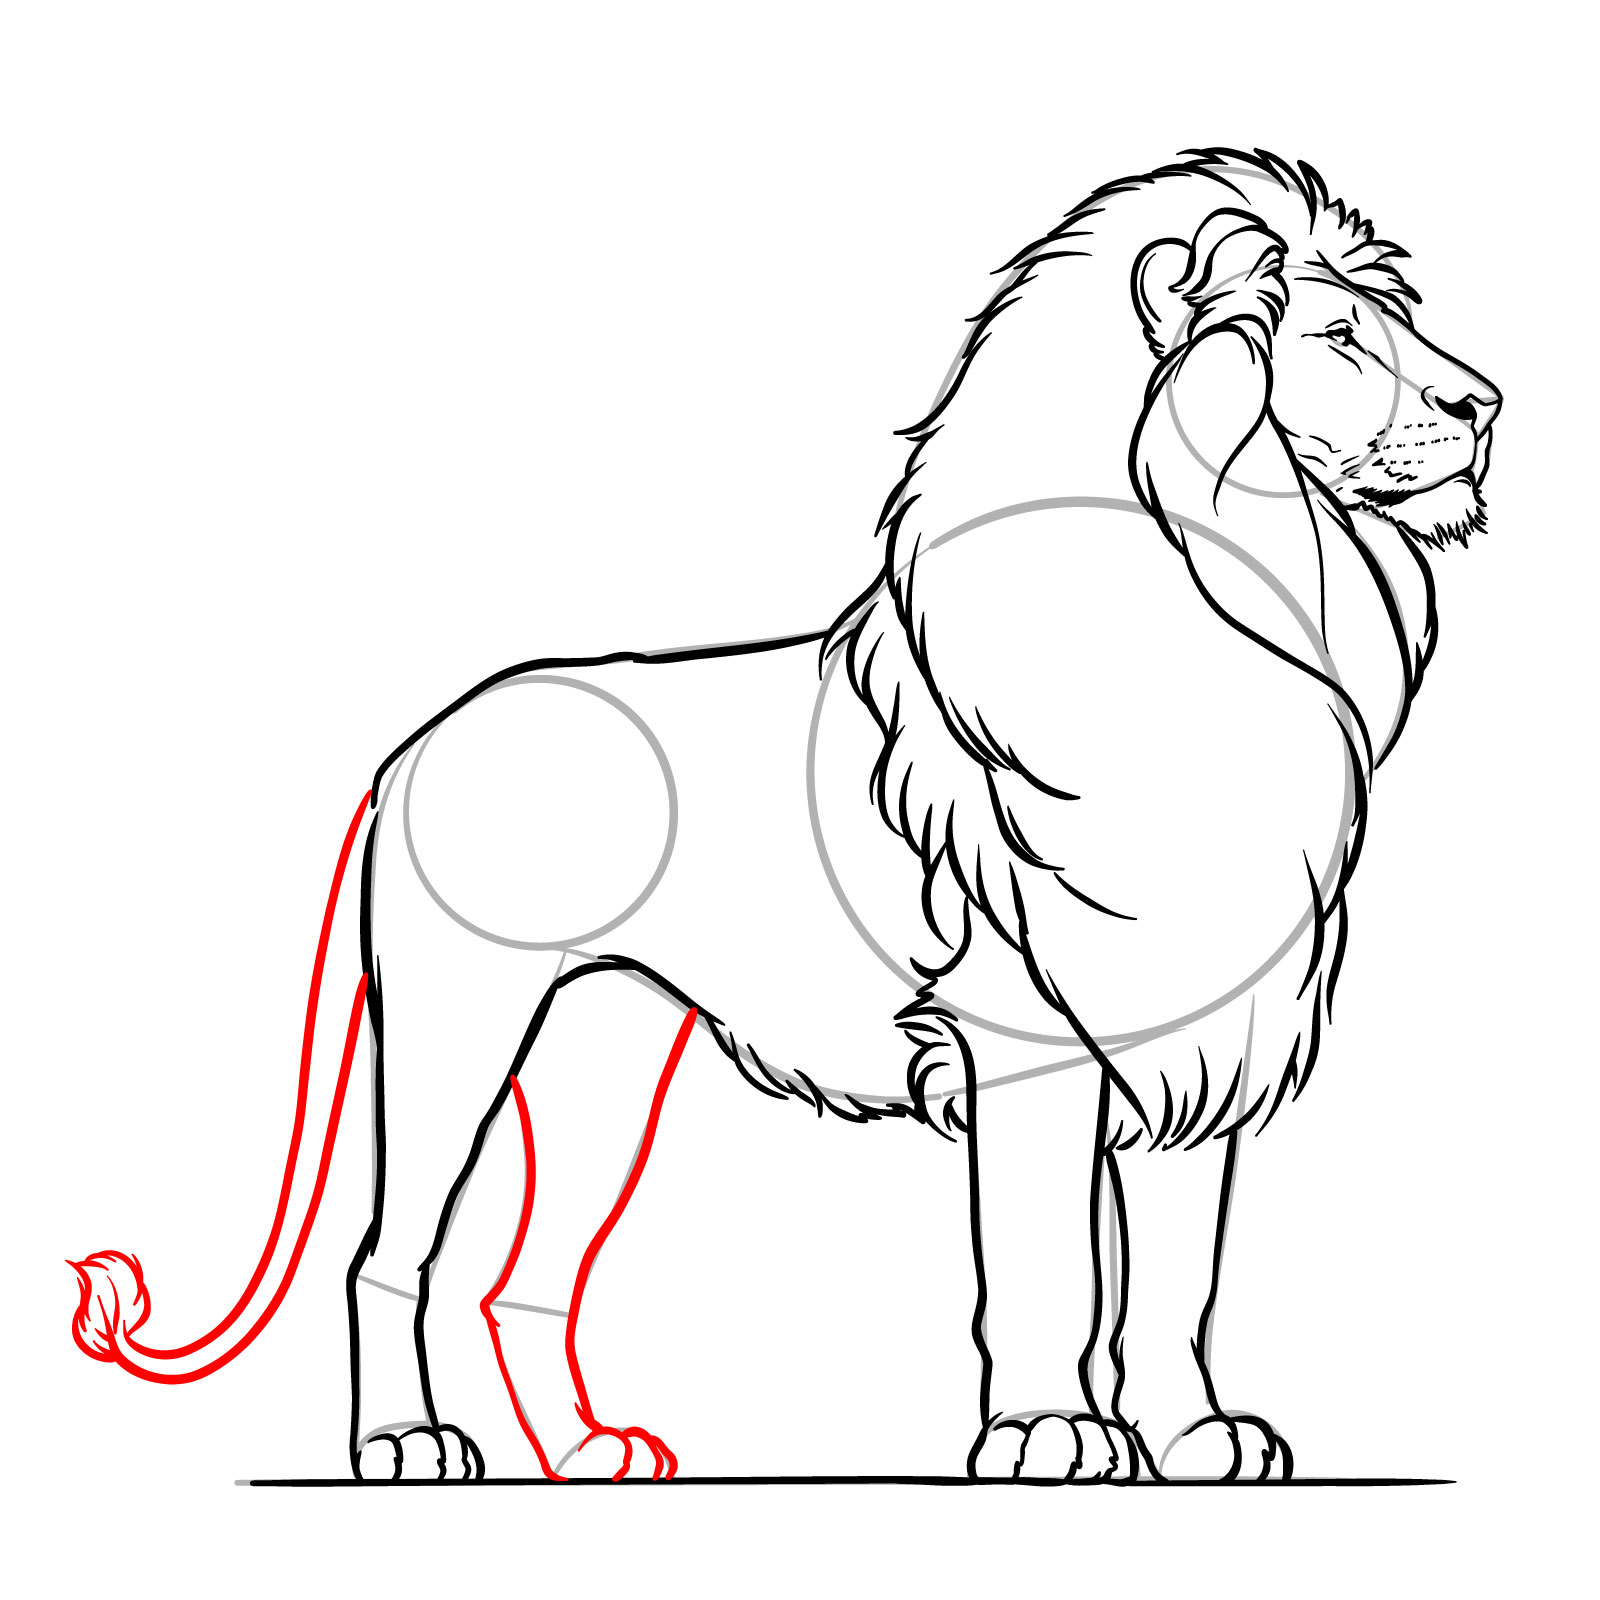 Adding the second rear leg and tail to a lion sketch - step 17